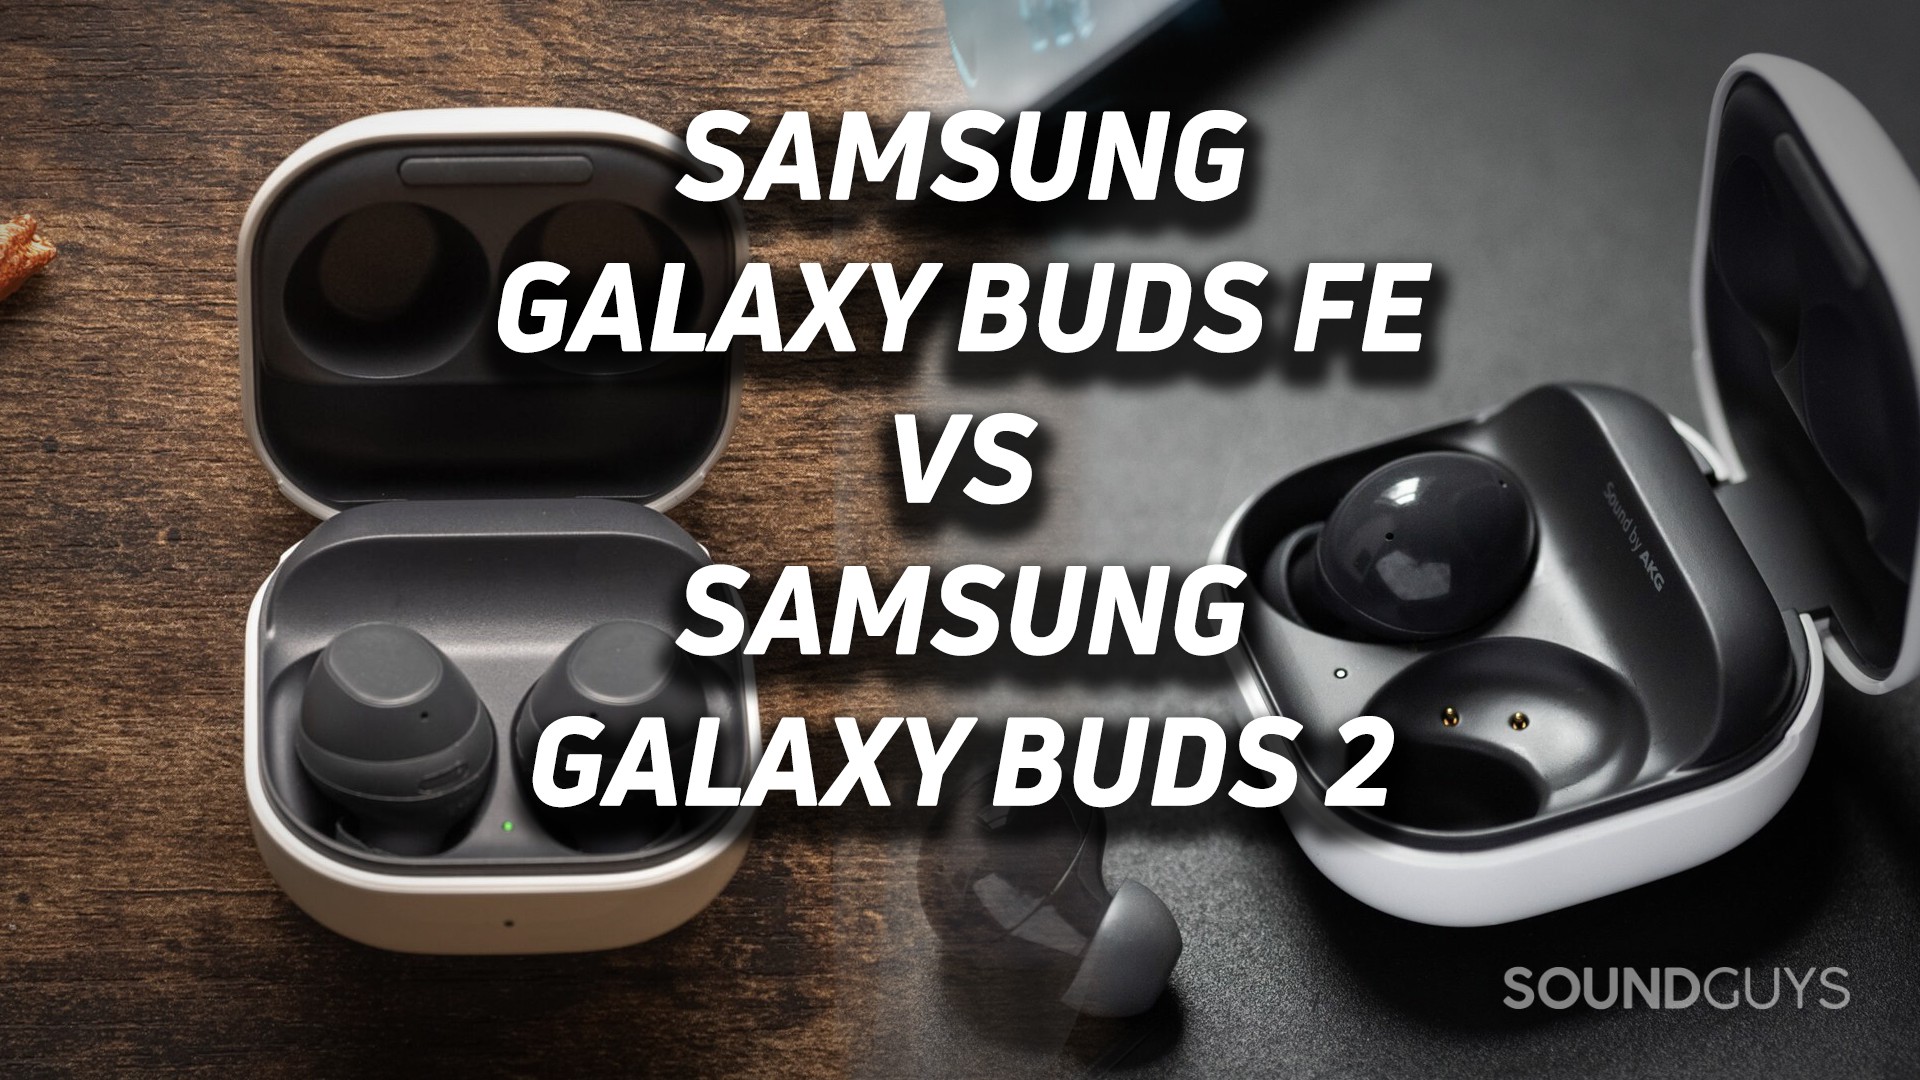 Two overlapping images of the Samsung Galaxy Buds FE and Samsung Galaxy Buds 2.